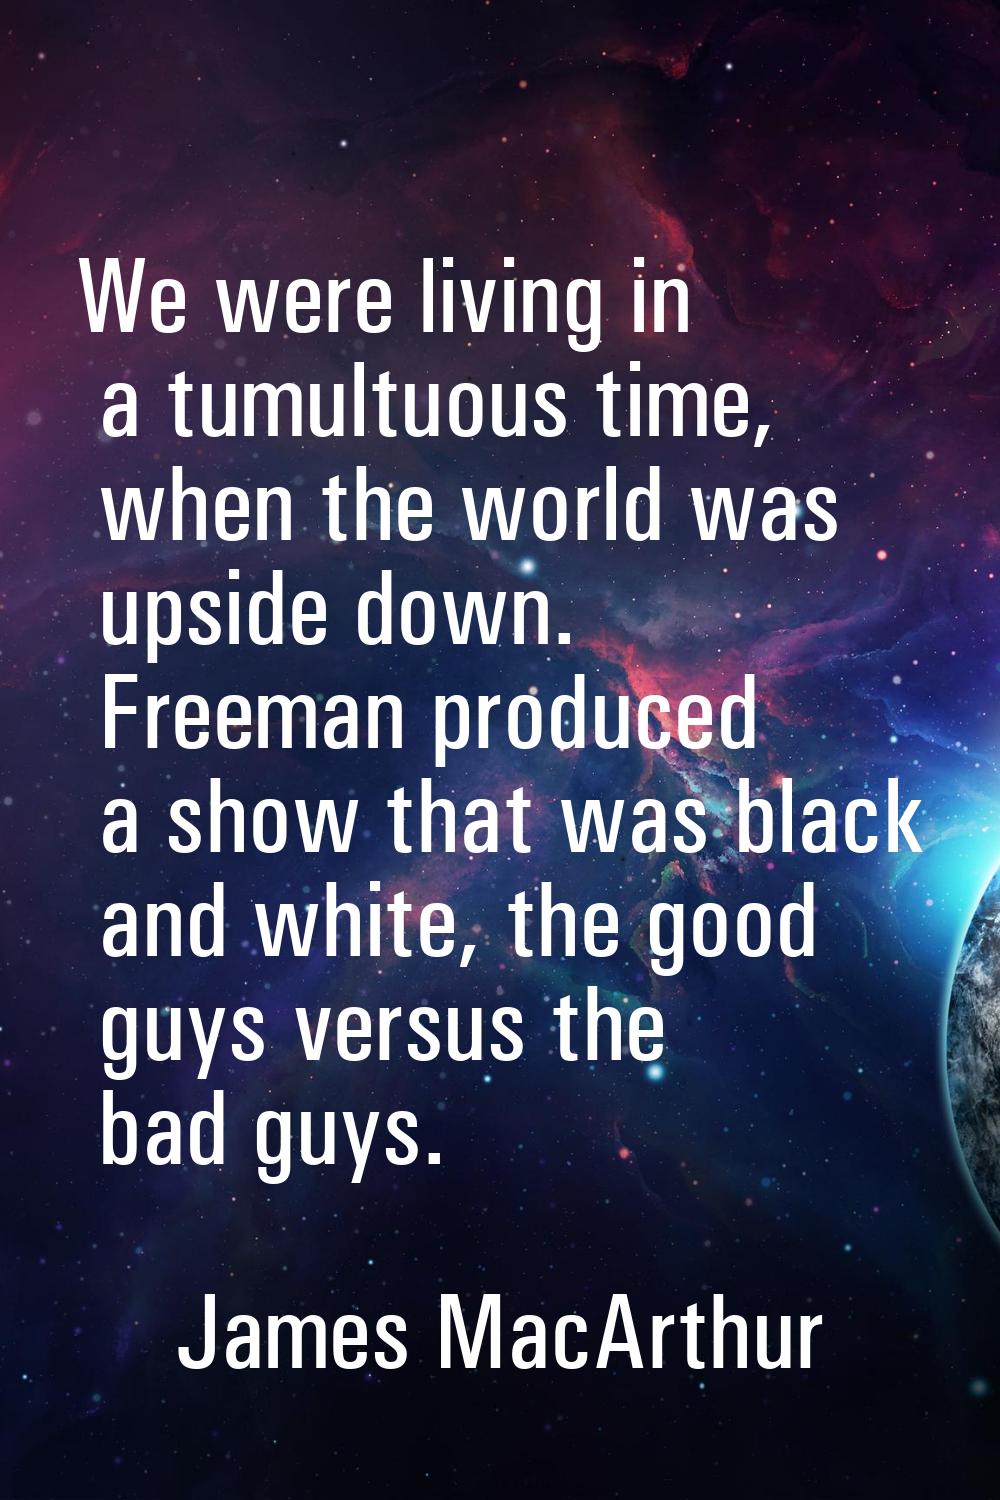 We were living in a tumultuous time, when the world was upside down. Freeman produced a show that w